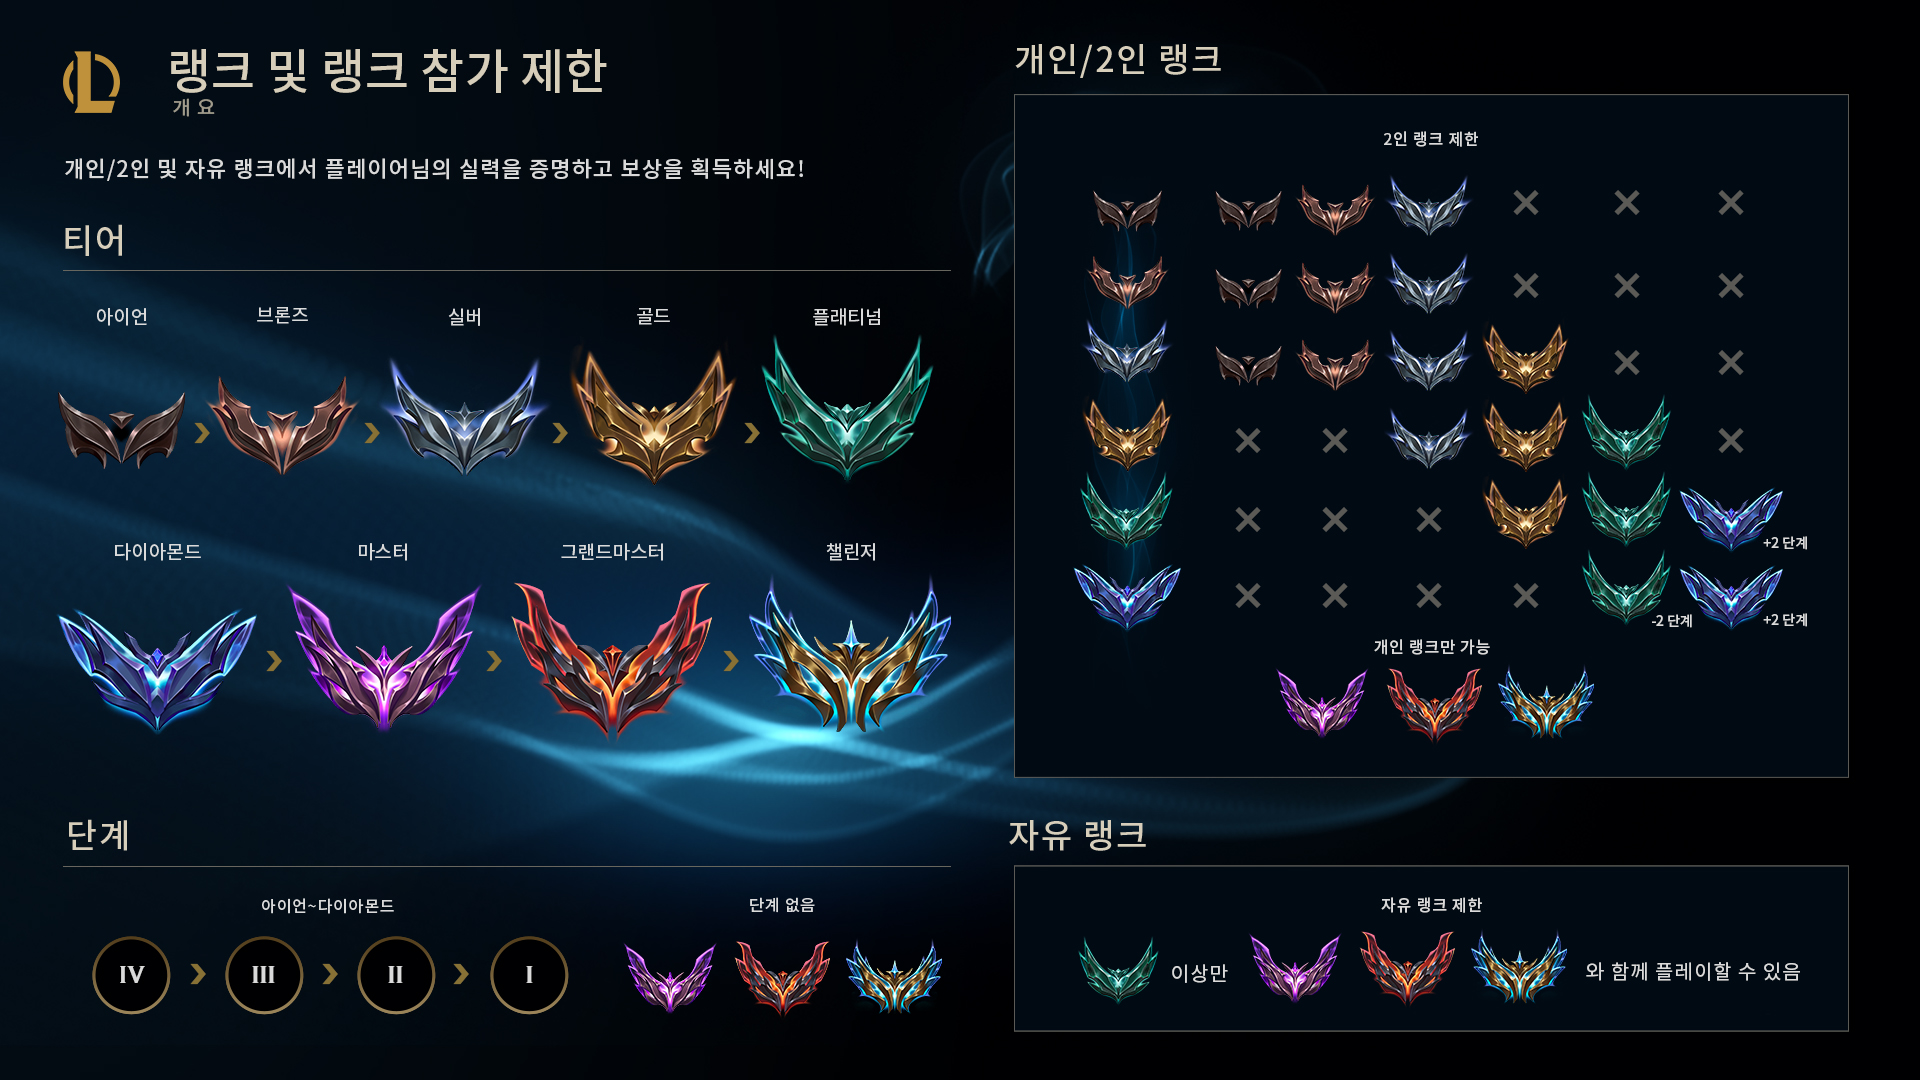 ranked-infographic-league-of-legends-season-12-for-Loc-1-of-5_KR.jpg